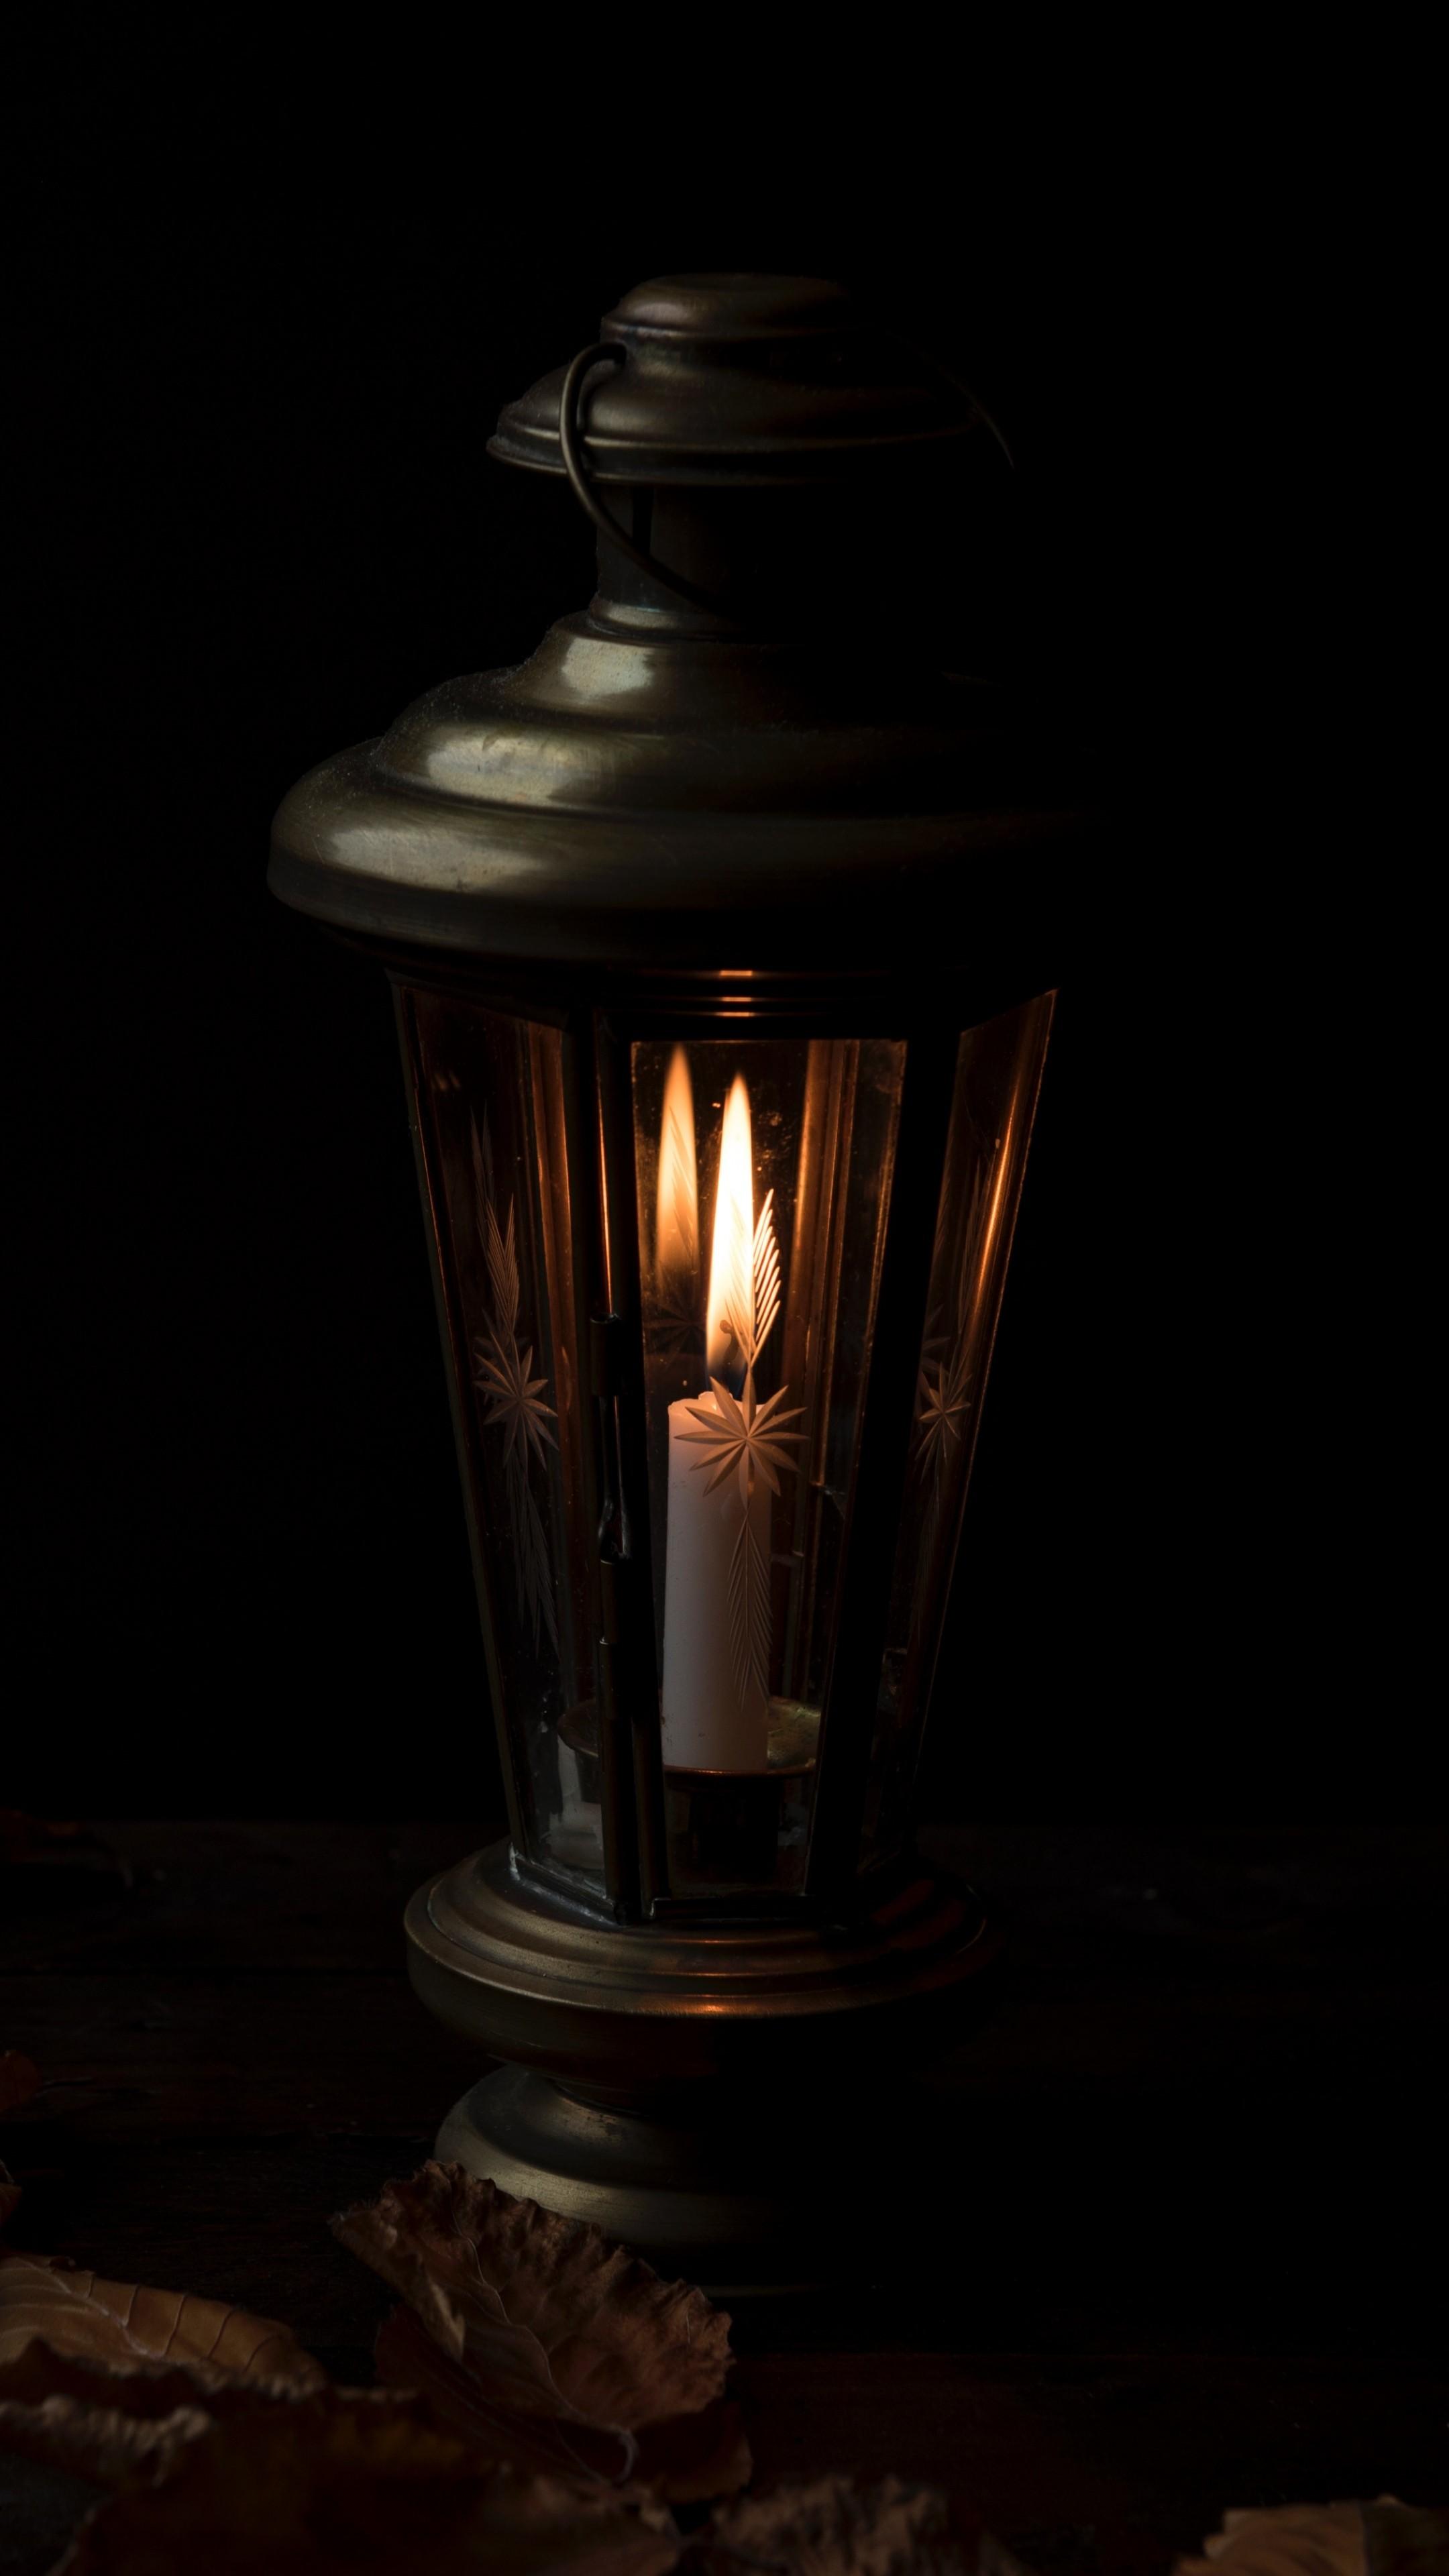 Candle Night Lamp Wallpaper - [2160x3840]